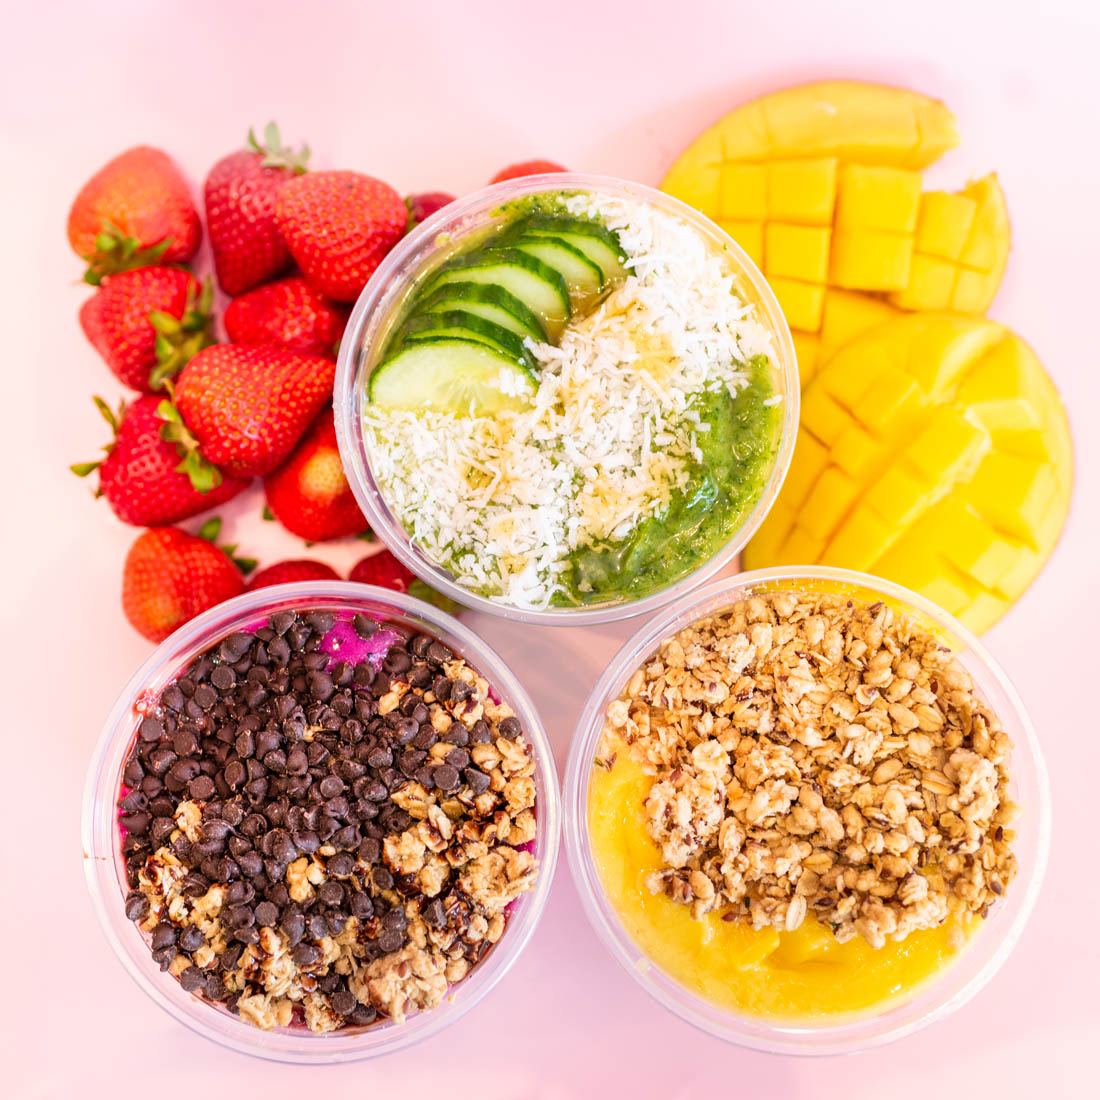 Rush Bowls smoothie bowls nutrition info in Flower Mound.